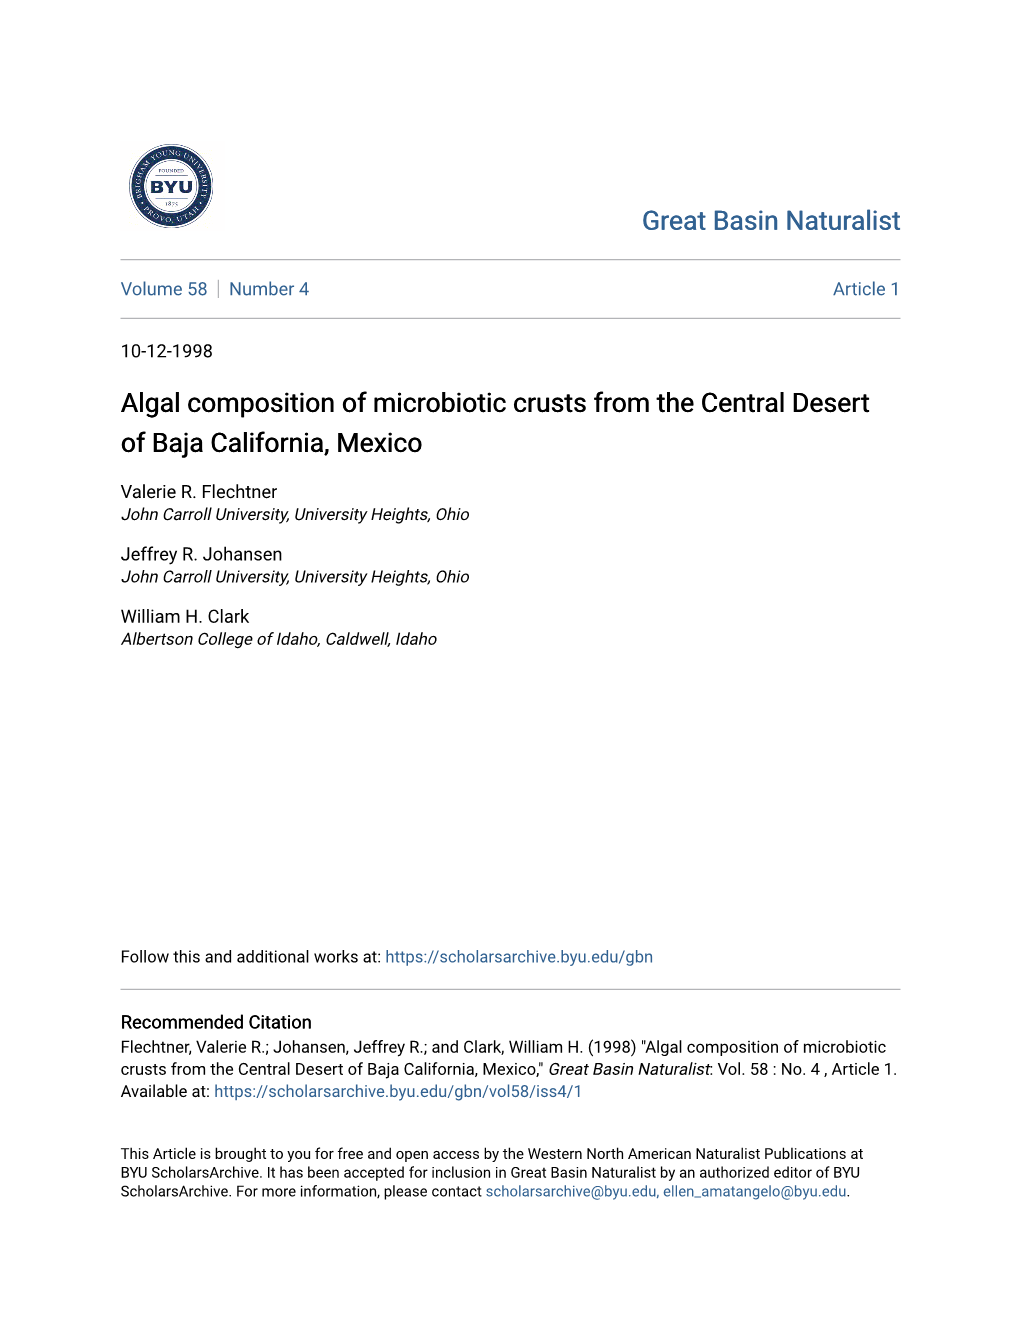 Algal Composition of Microbiotic Crusts from the Central Desert of Baja California, Mexico